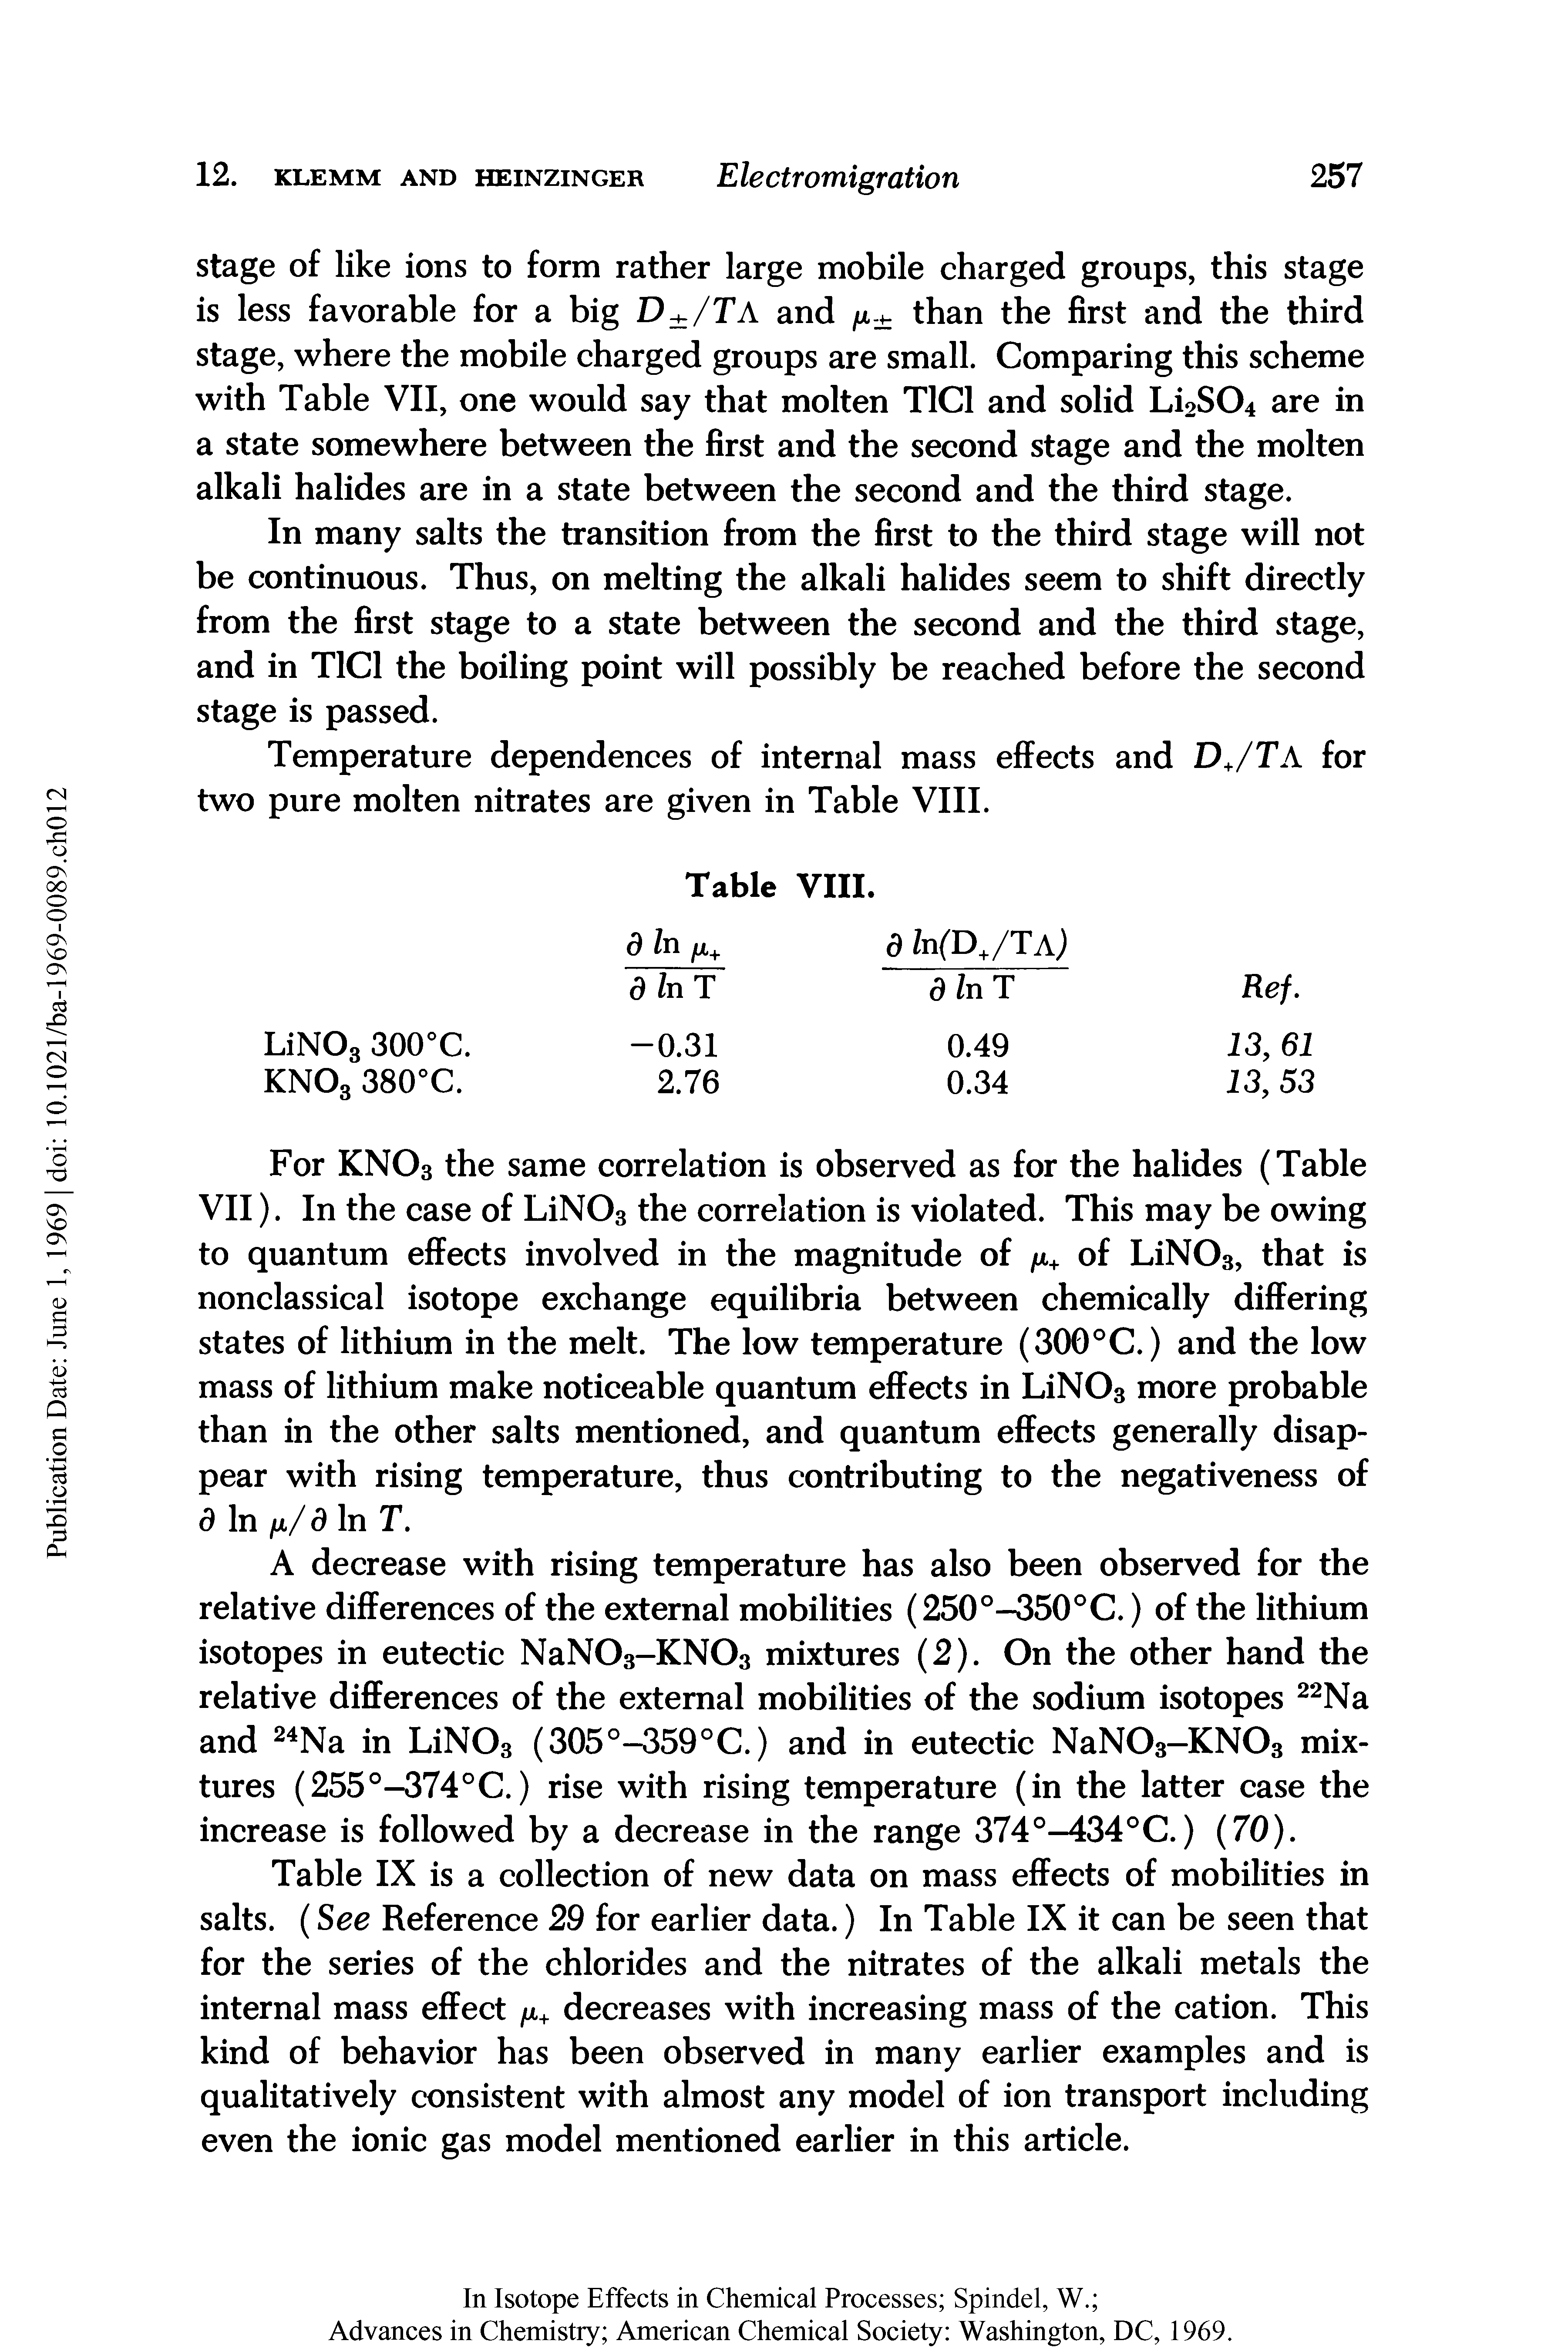 Table IX is a collection of new data on mass effects of mobilities in salts. (See Reference 29 for earlier data.) In Table IX it can be seen that for the series of the chlorides and the nitrates of the alkali metals the internal mass effect /x+ decreases with increasing mass of the cation. This kind of behavior has been observed in many earlier examples and is qualitatively consistent with almost any model of ion transport including even the ionic gas model mentioned earlier in this article.